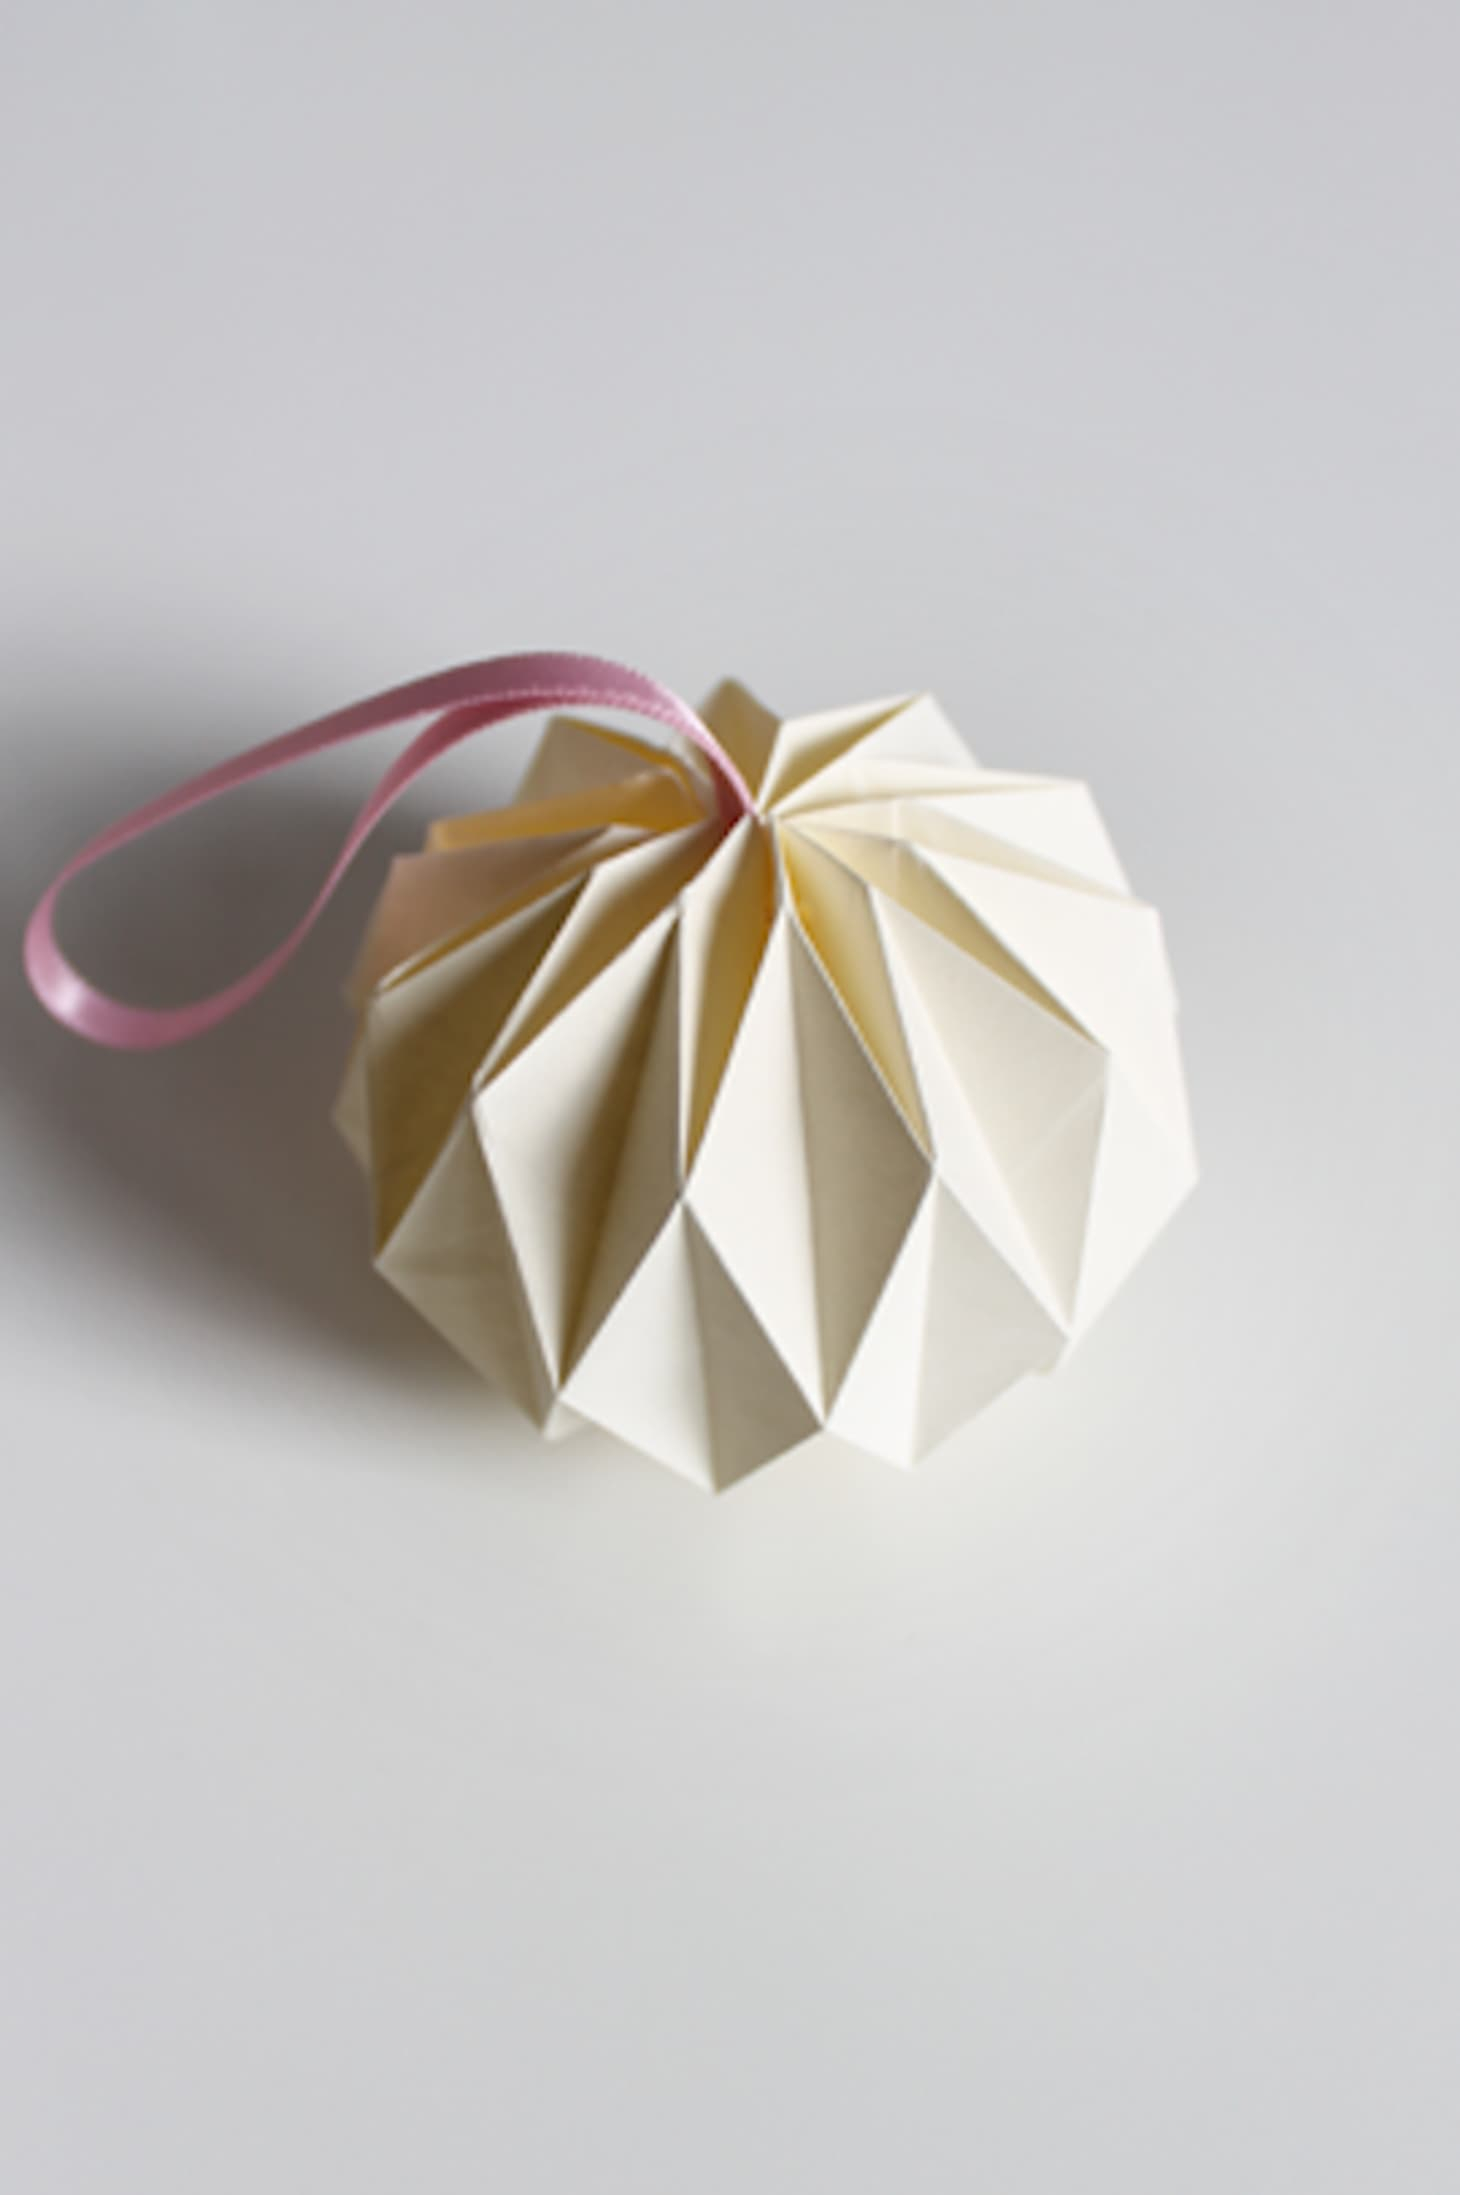 Origami Sphere Easy Origami Christmas Ornaments Apartment Therapy